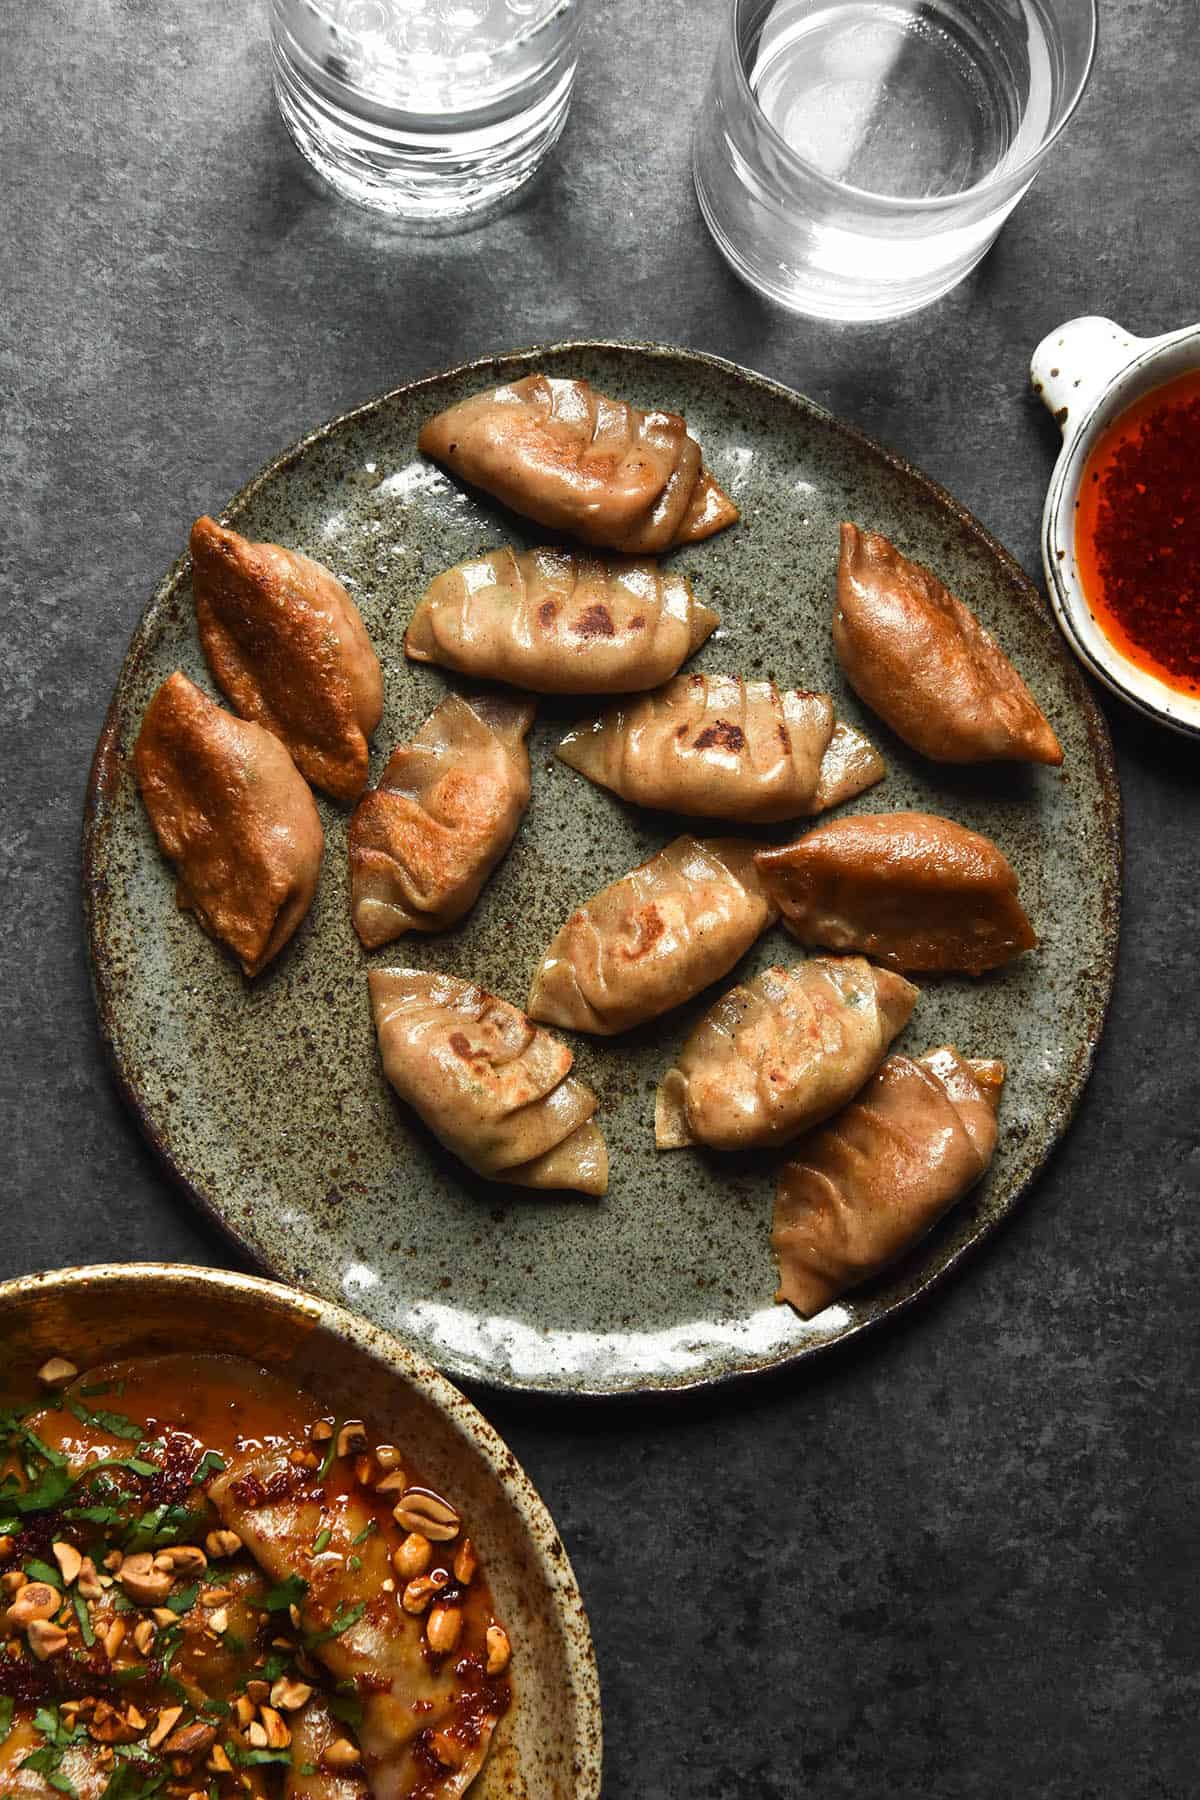 An aerial image of pleated and fried gluten free dumplings on a dark blue speckled ceramic plate atop a dark blue backdrop. The central plate is surrounded by water glasses, some chilli oil and a second bowl of dumplings in a peanut sauce. 